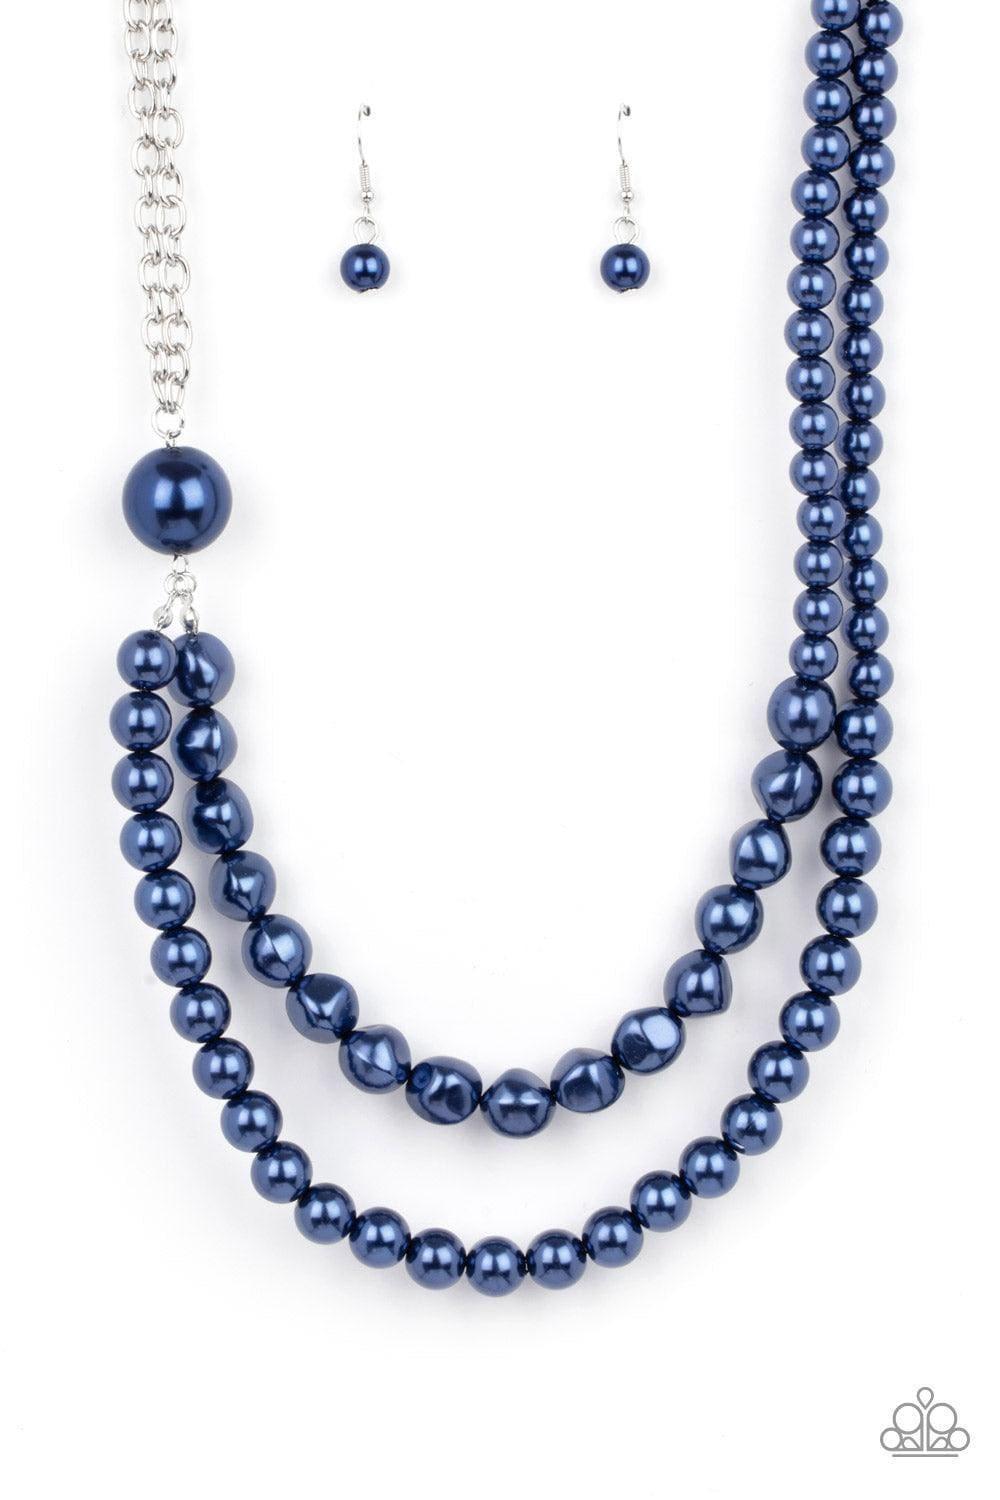 Paparazzi Accessories - Remarkable Radiance - Blue Pearl Necklace - Bling by JessieK